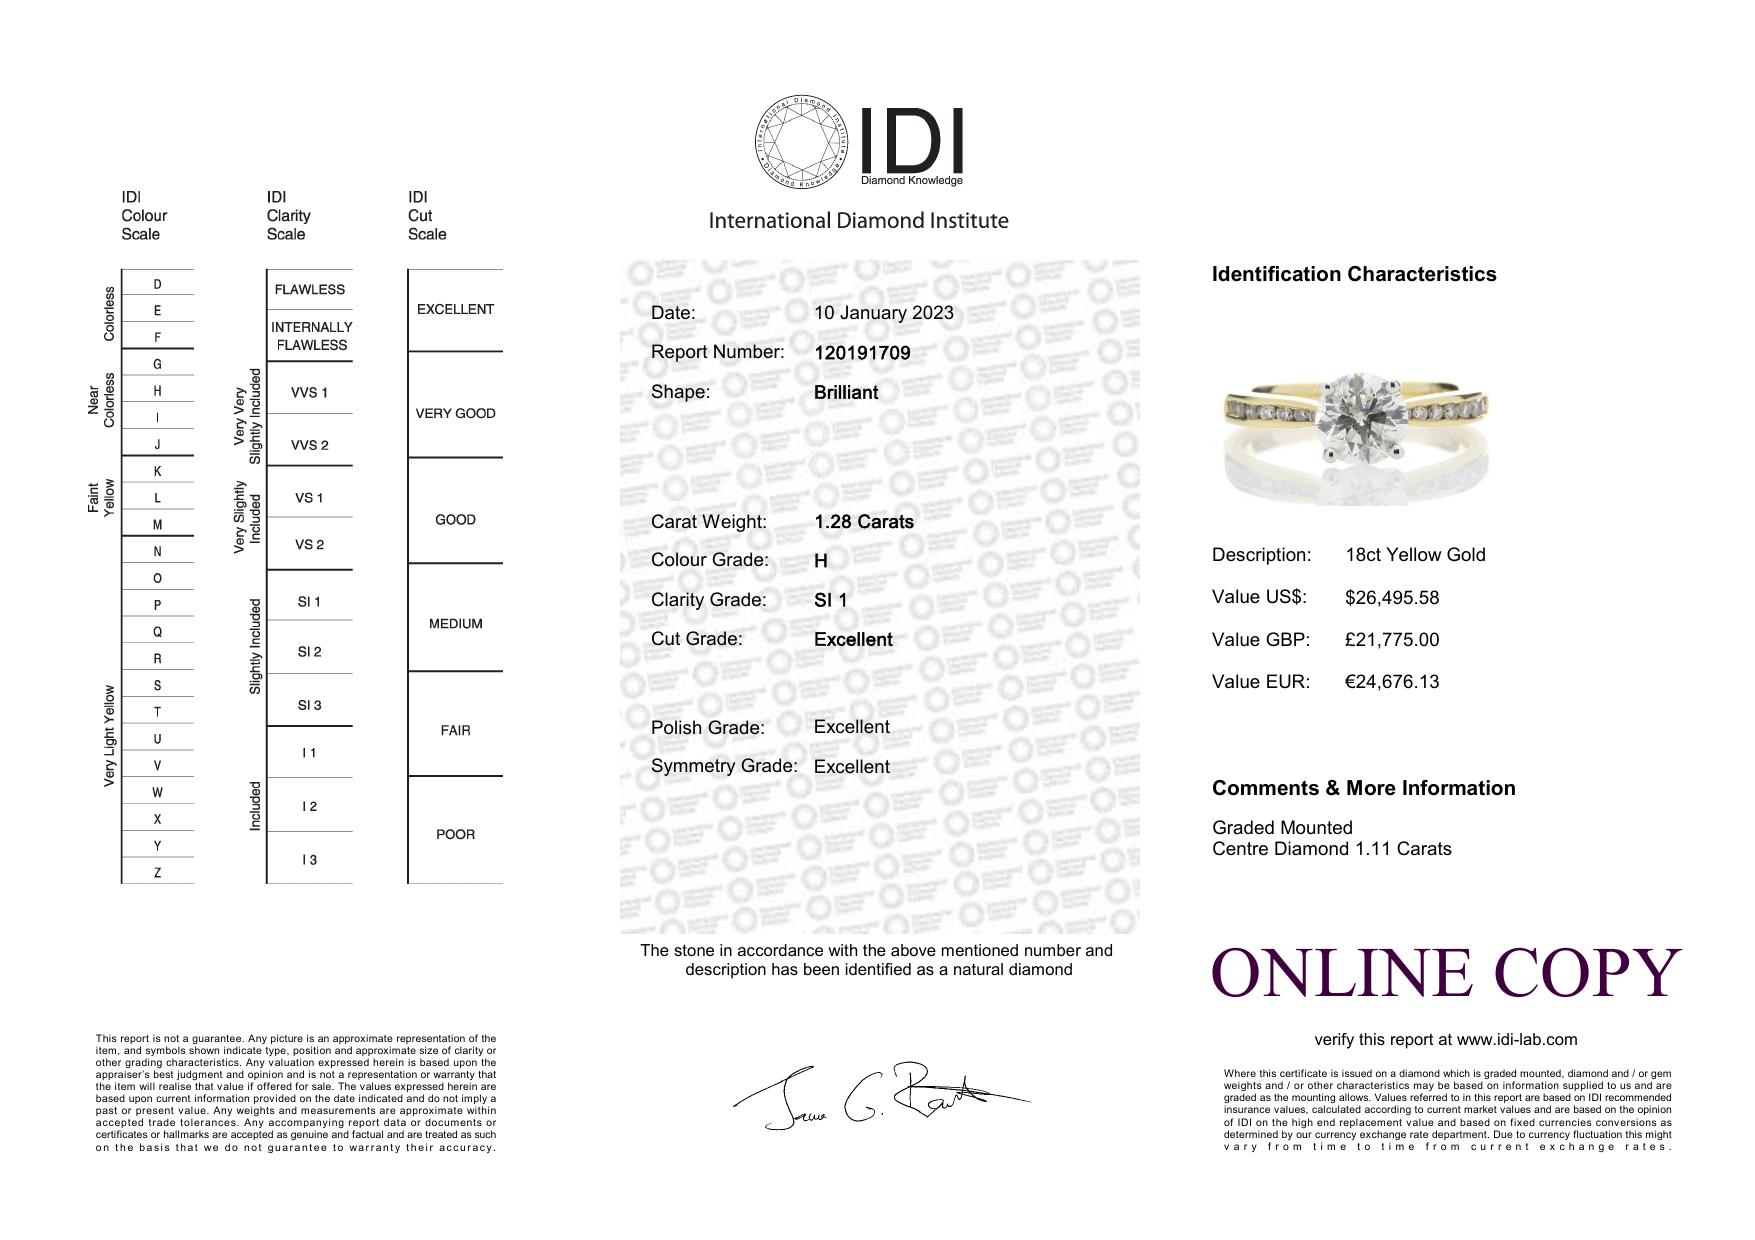 18ct Yellow Gold Diamond Ring With Stone Set Shoulders 1.28 Carats - Valued By IDI £21,775.00 - - Image 5 of 5